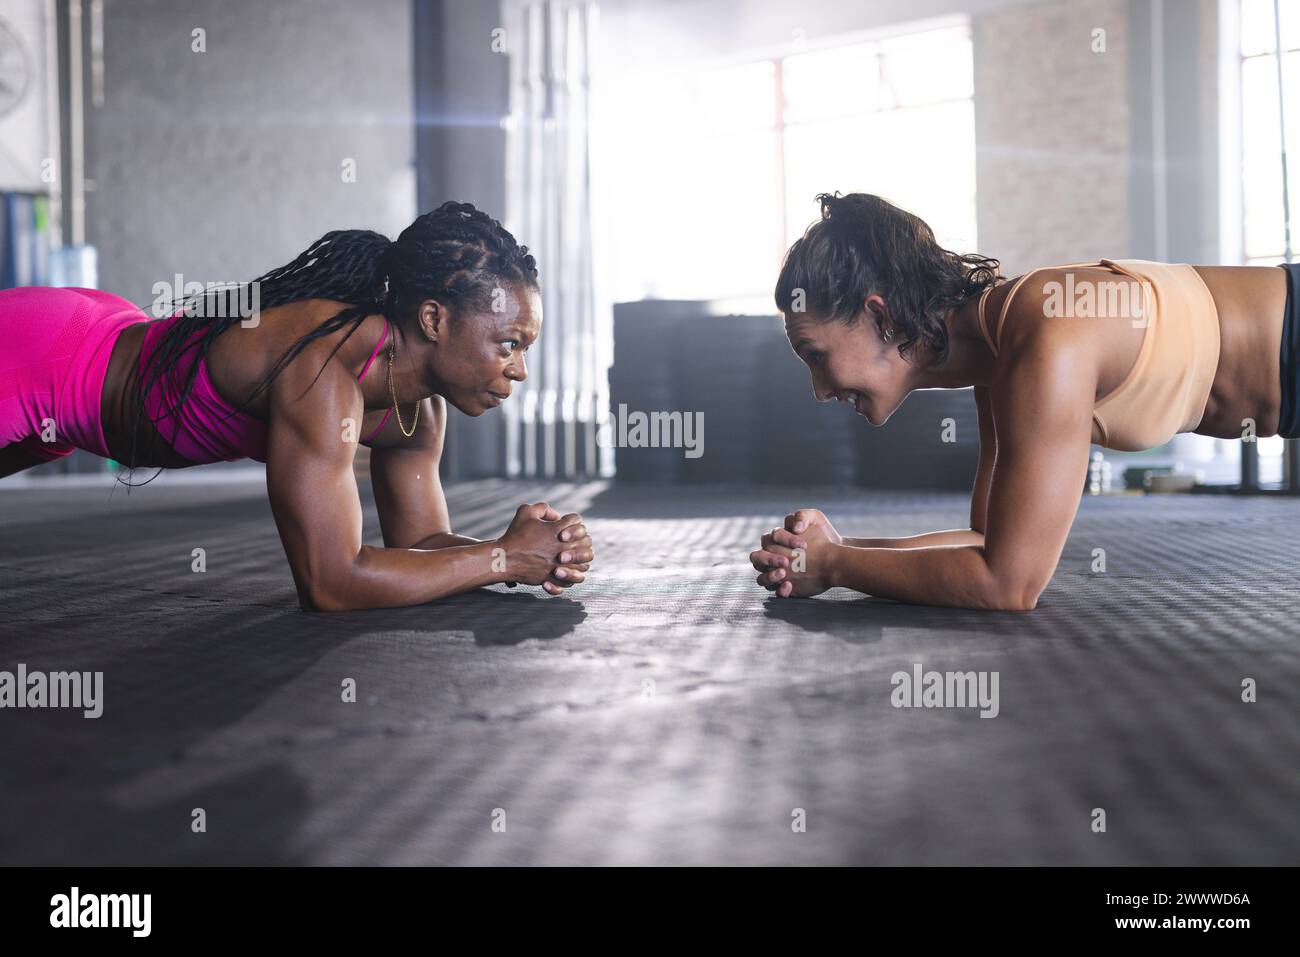 Two women are engaged in a plank exercise in the gym, displaying focus and strength Stock Photo